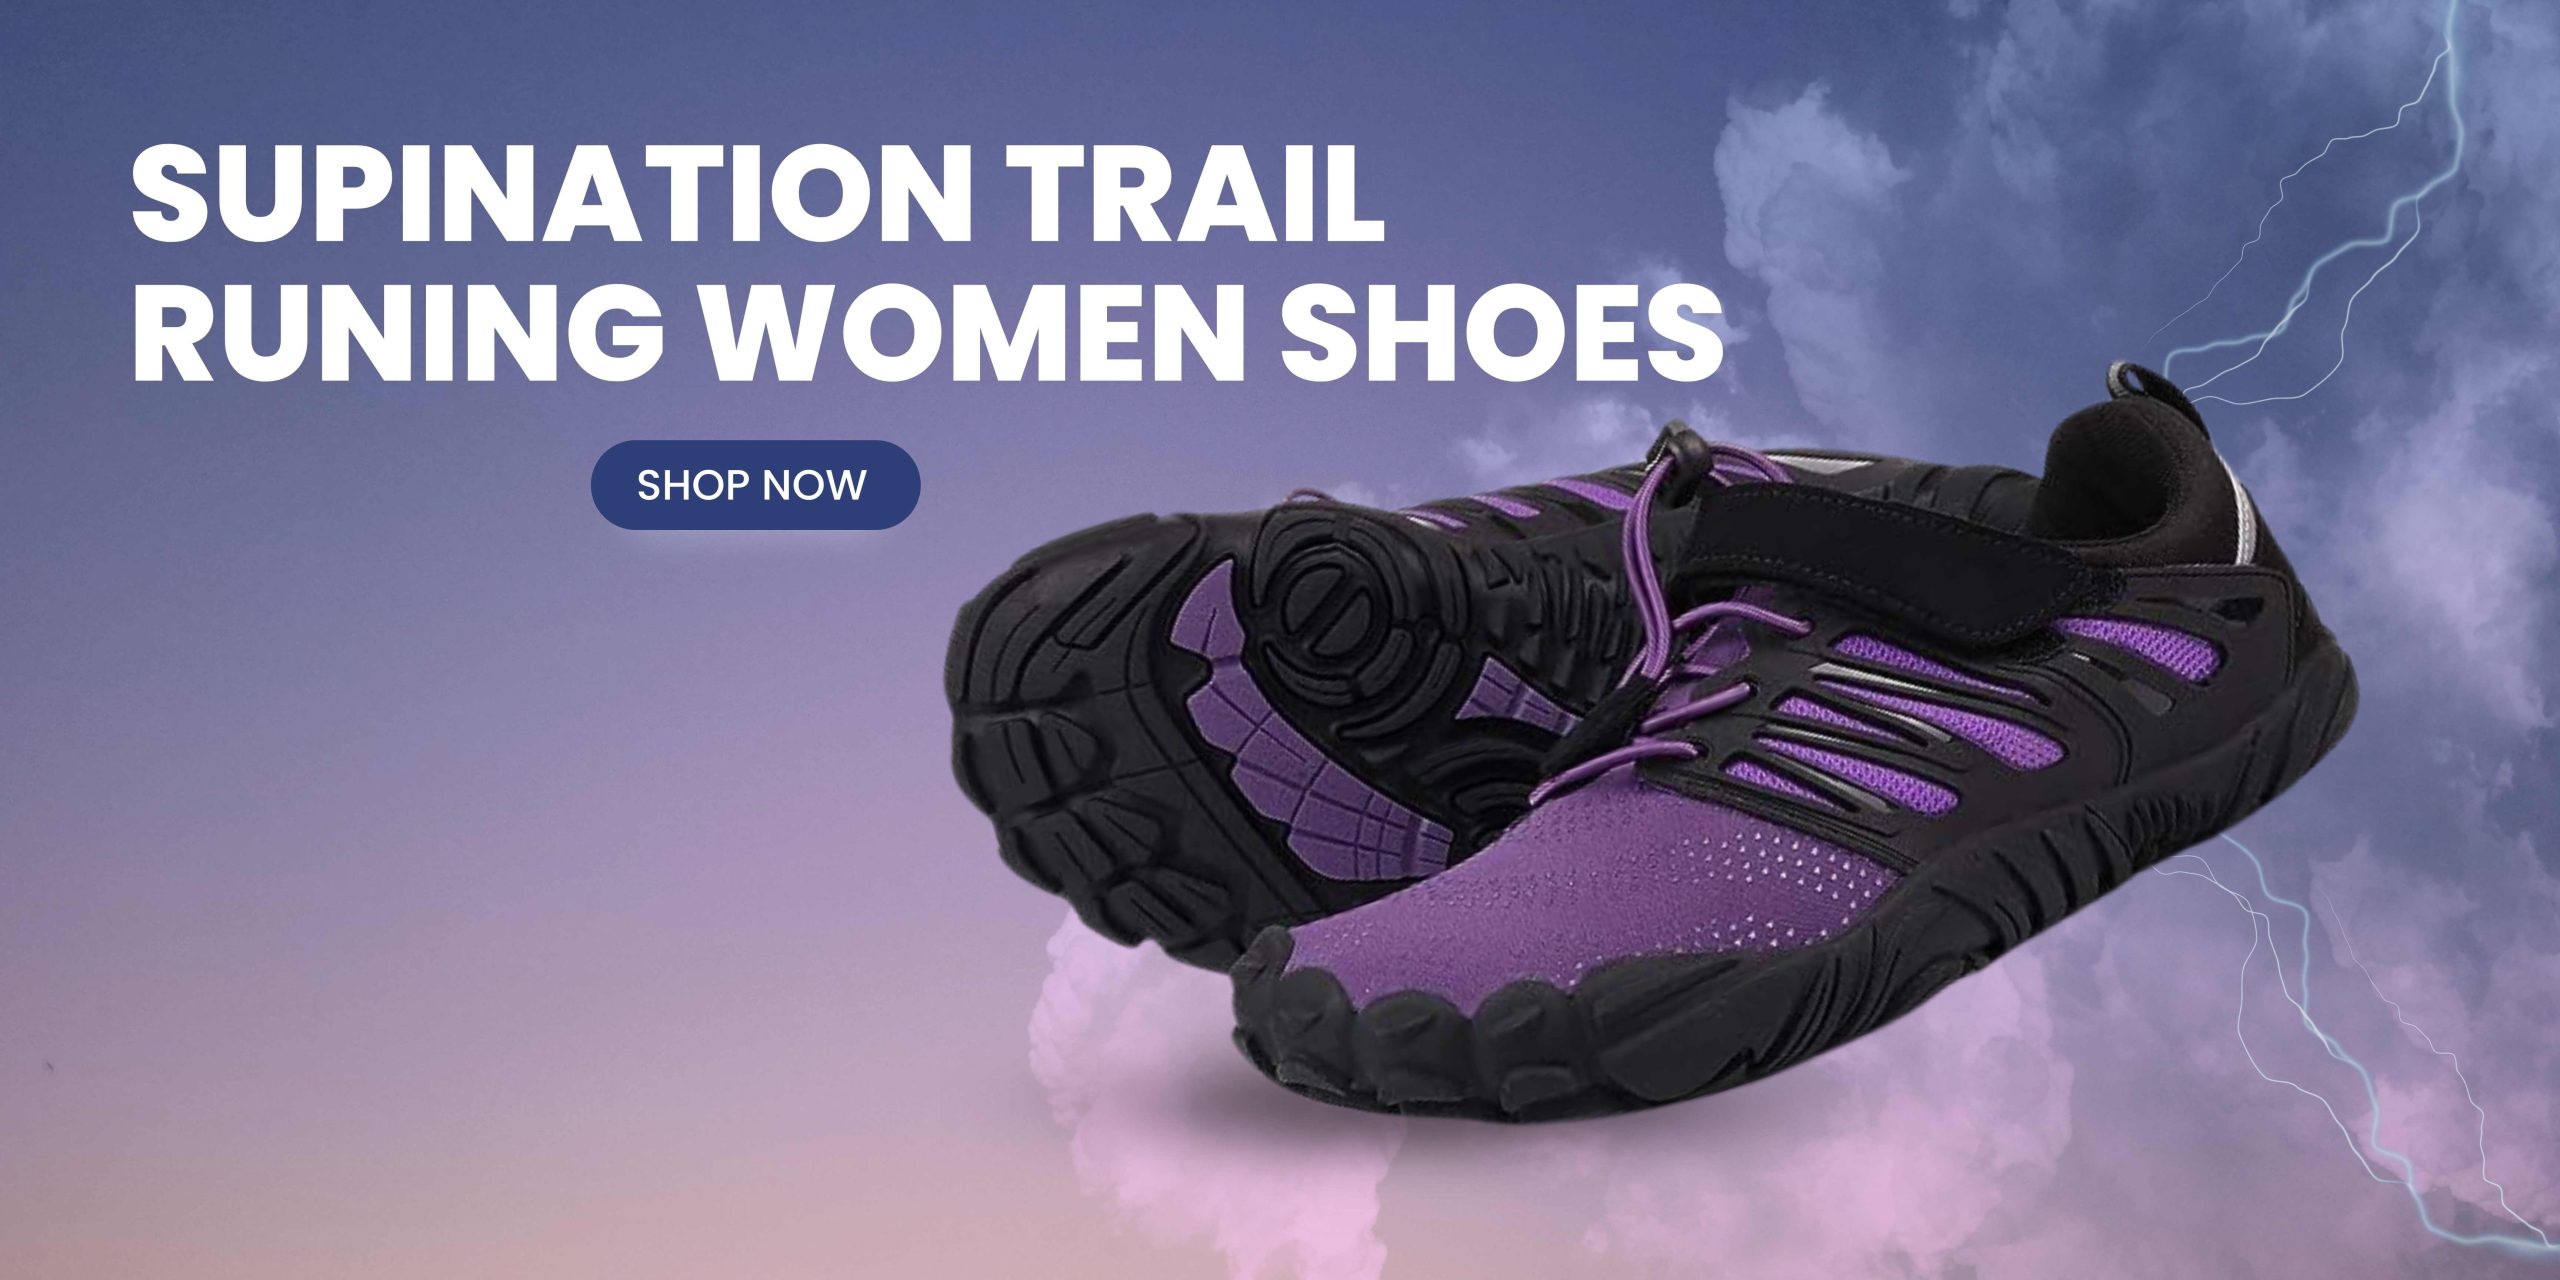 Supination Trail Running Women Shoes: Providing the Perfect Fit for a Smooth Run